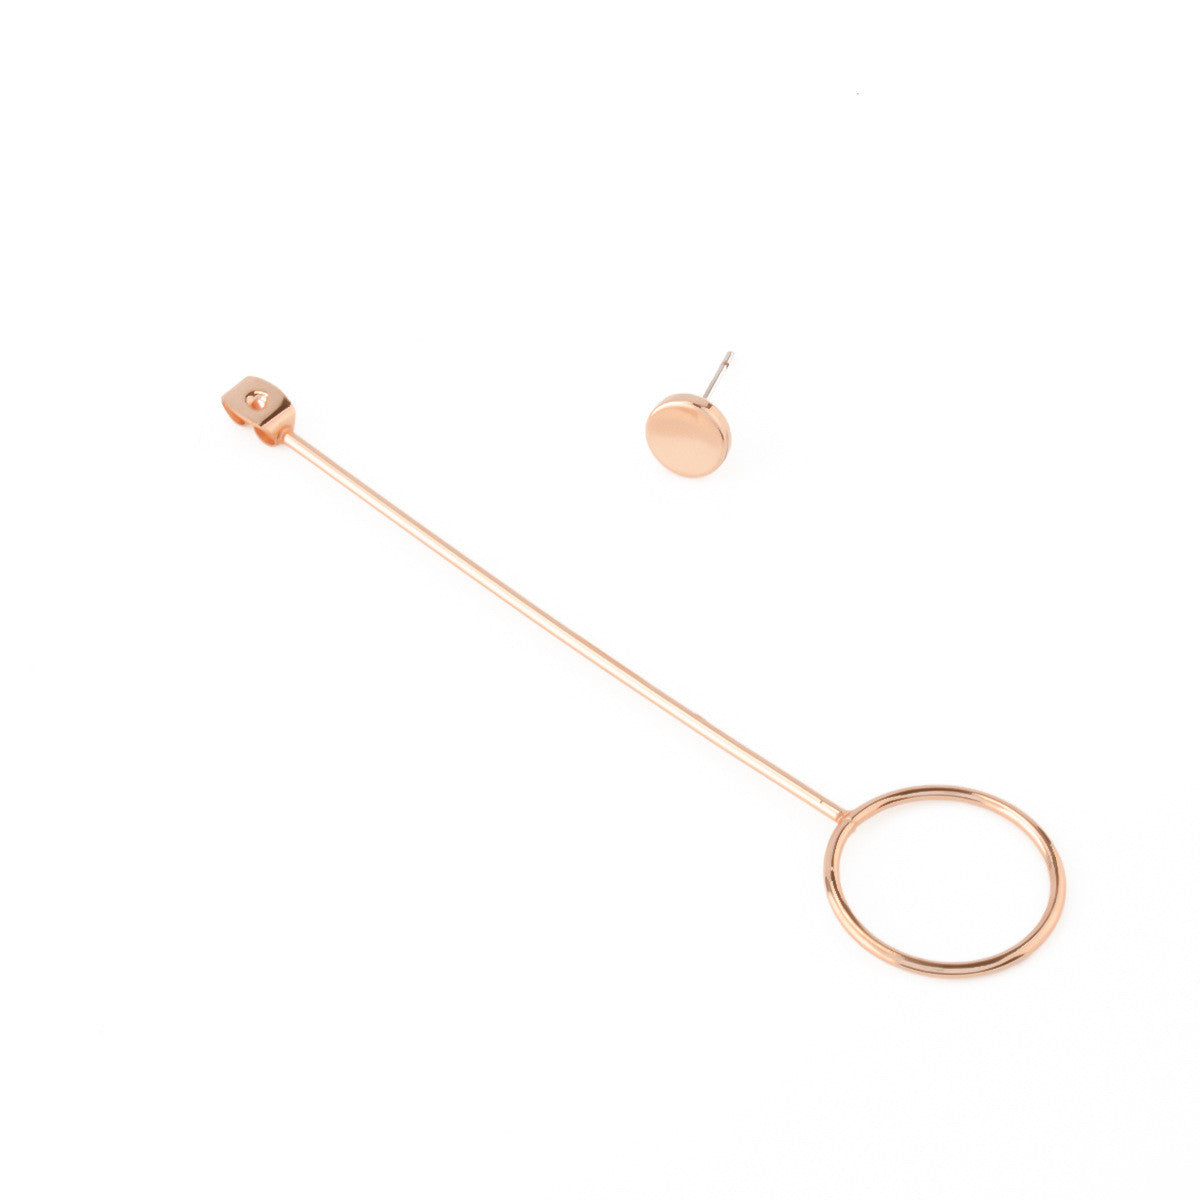 Strip Loops Copper Stud Earrings - Oh Yours Fashion - 6